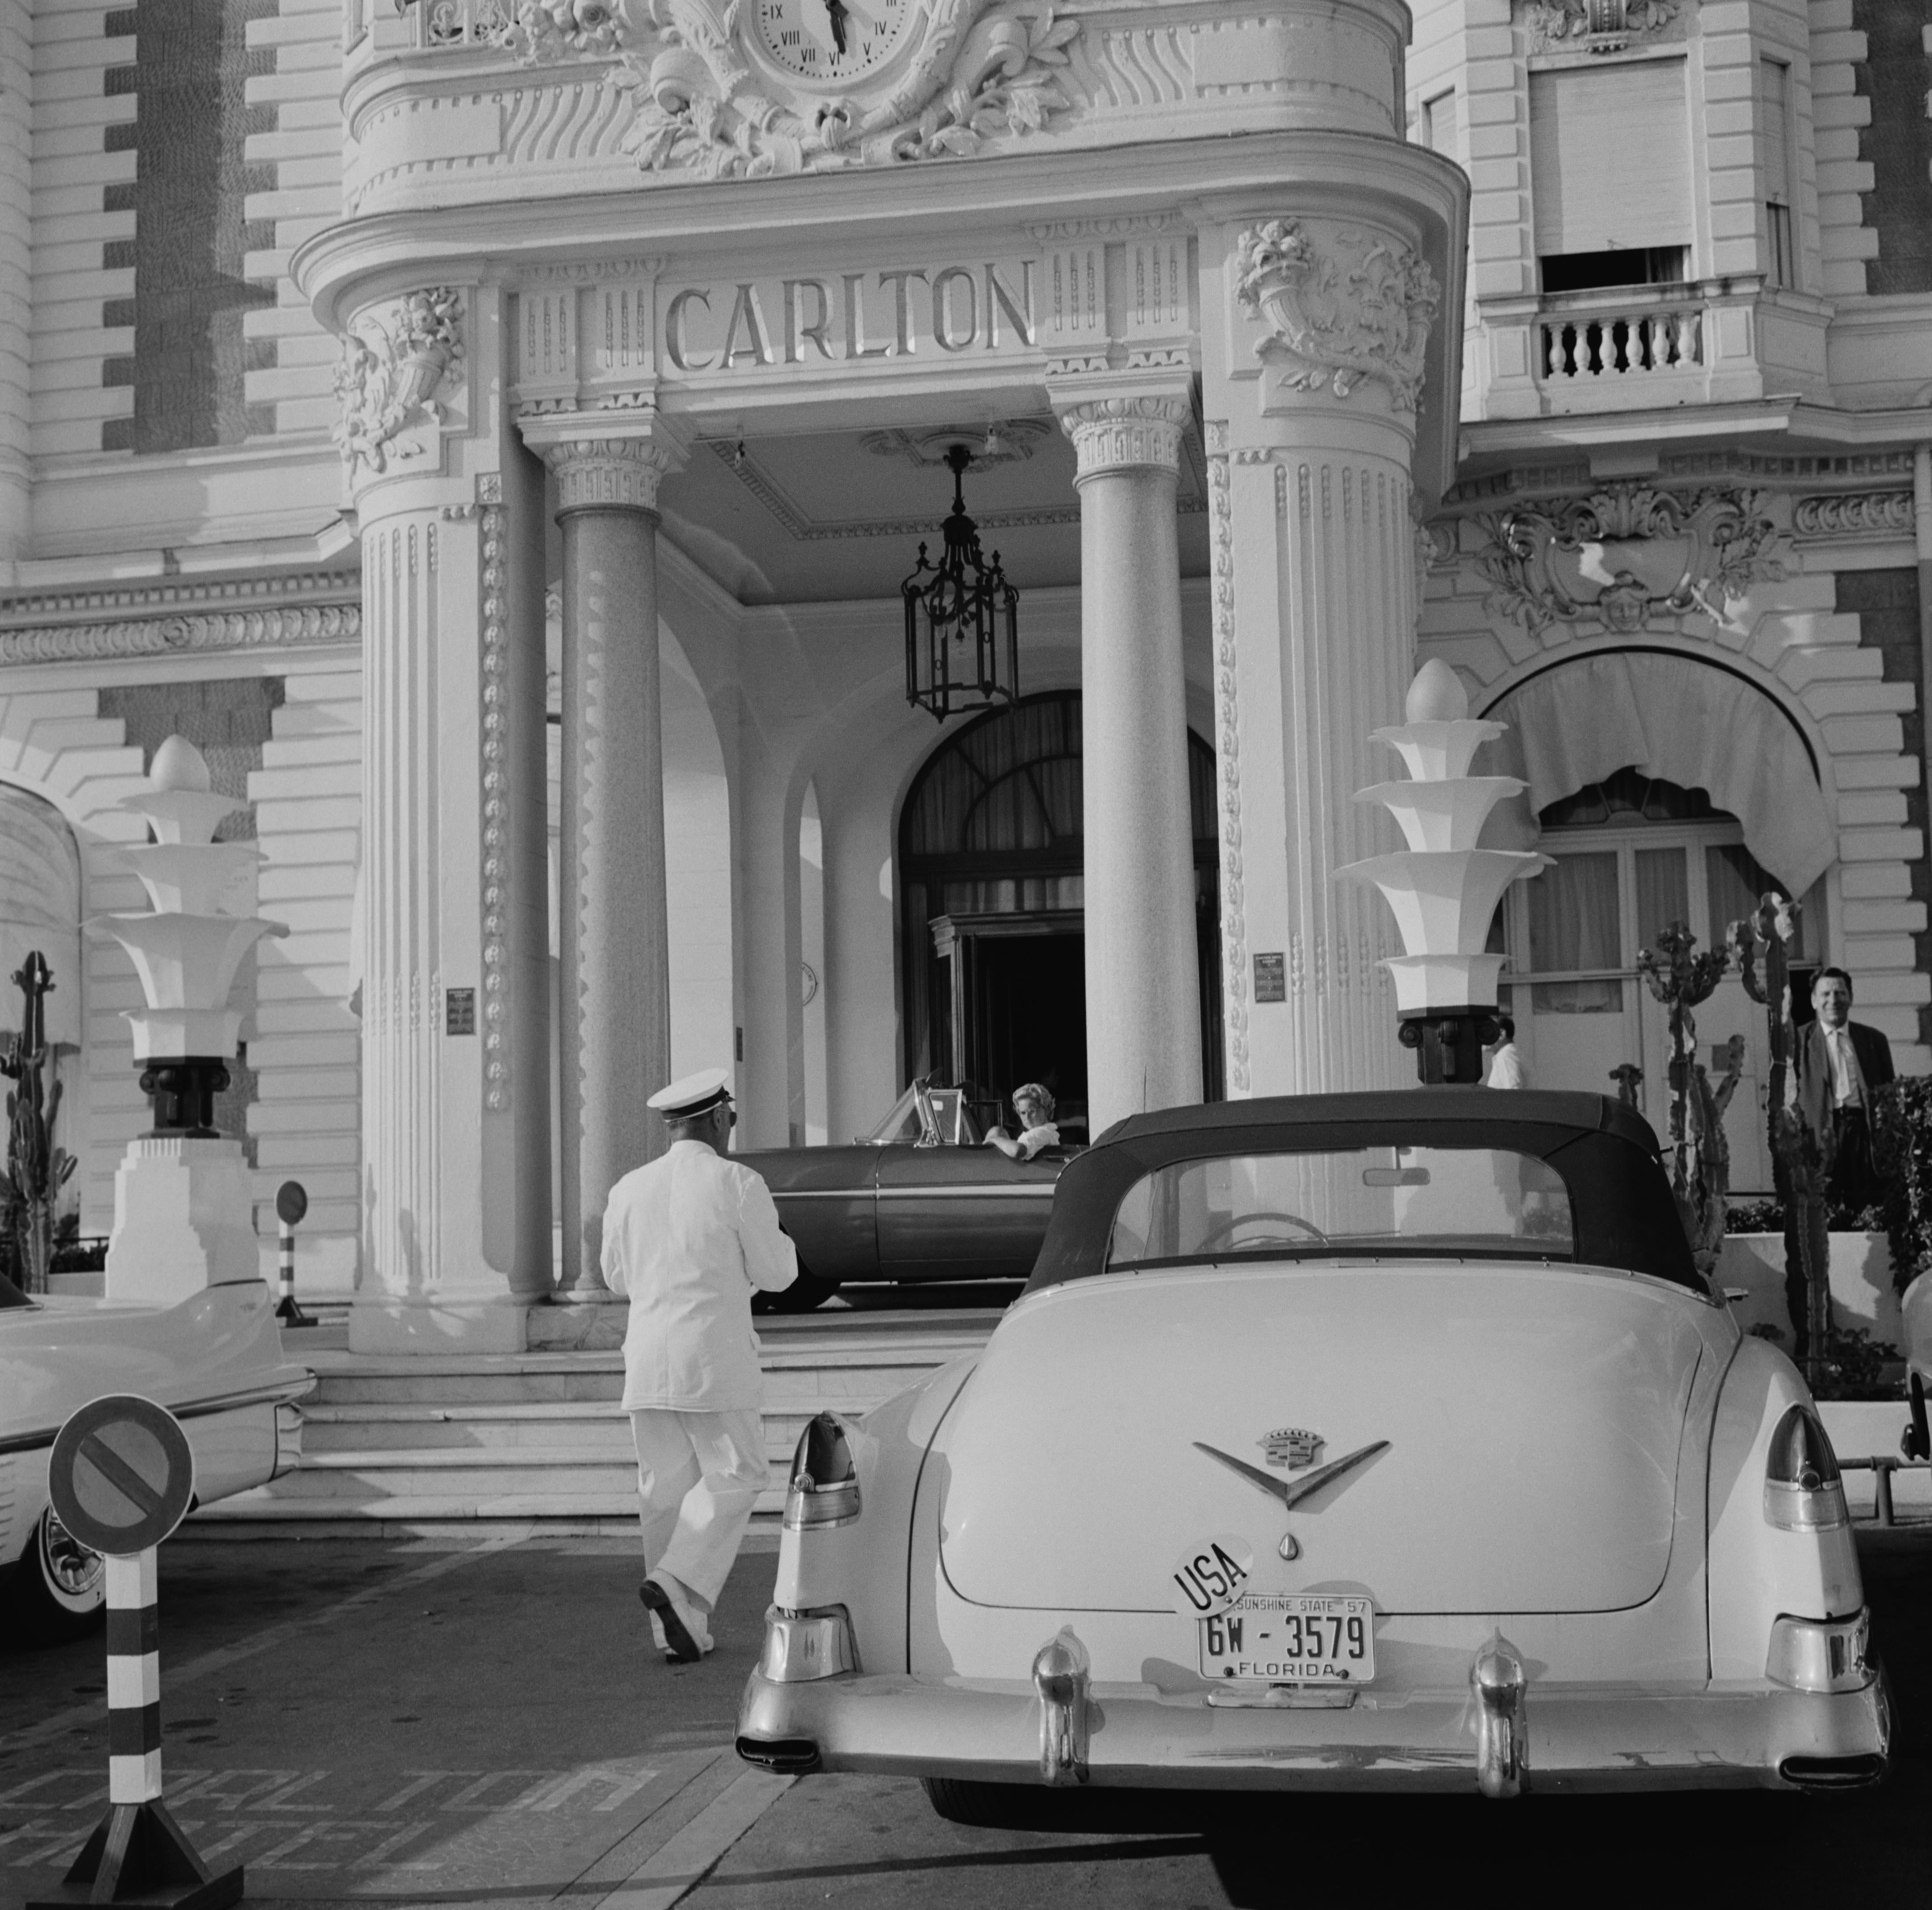 'The Carlton Hotel' 1955 Slim Aarons Limited Estate Edition
A Cadillac with Florida plates parked outside the Carlton Hotel, Cannes, France, circa 1955. 

Slim Aarons silver gelatine fibre based print 
Printed Later 
Slim Aarons Estate Edition